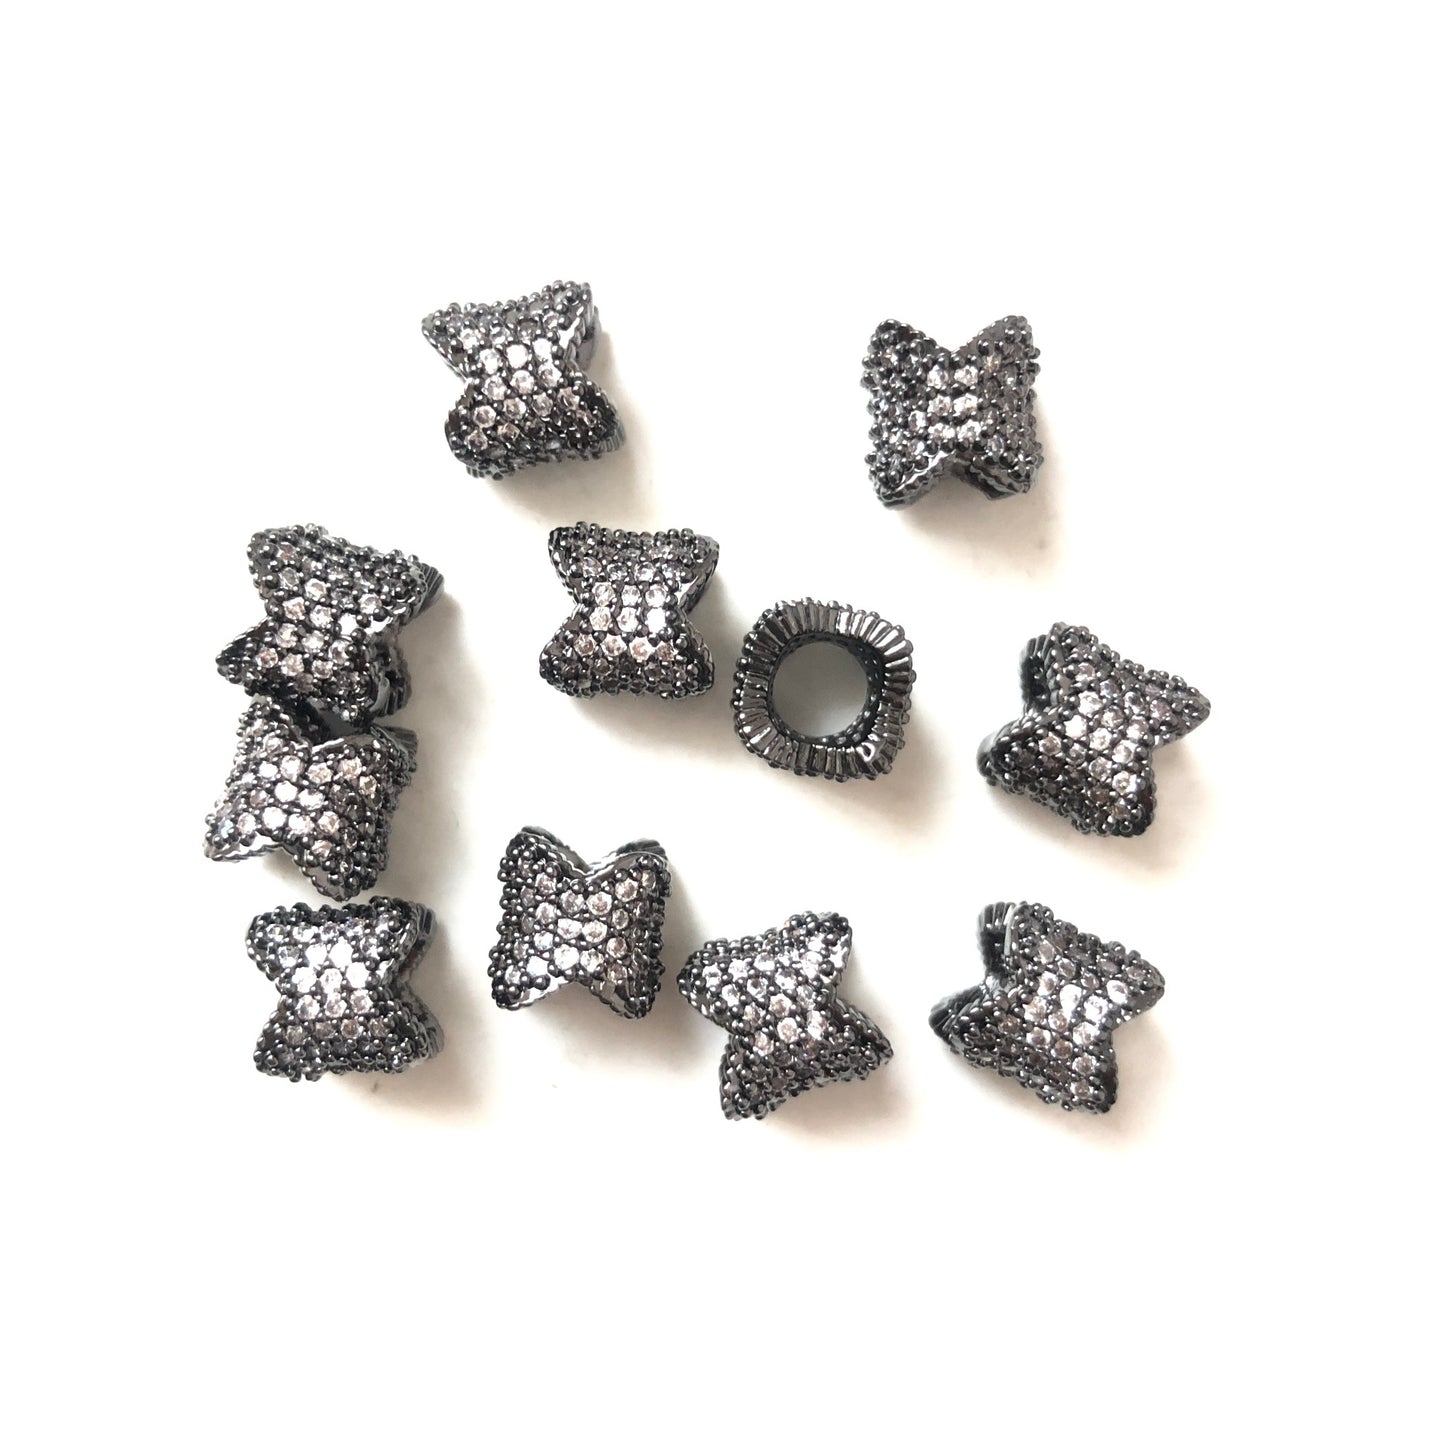 20pcs/lot 8*6.8mm CZ Paved Flower Tube Spacers Black CZ Paved Spacers Tube Bar Centerpieces Charms Beads Beyond